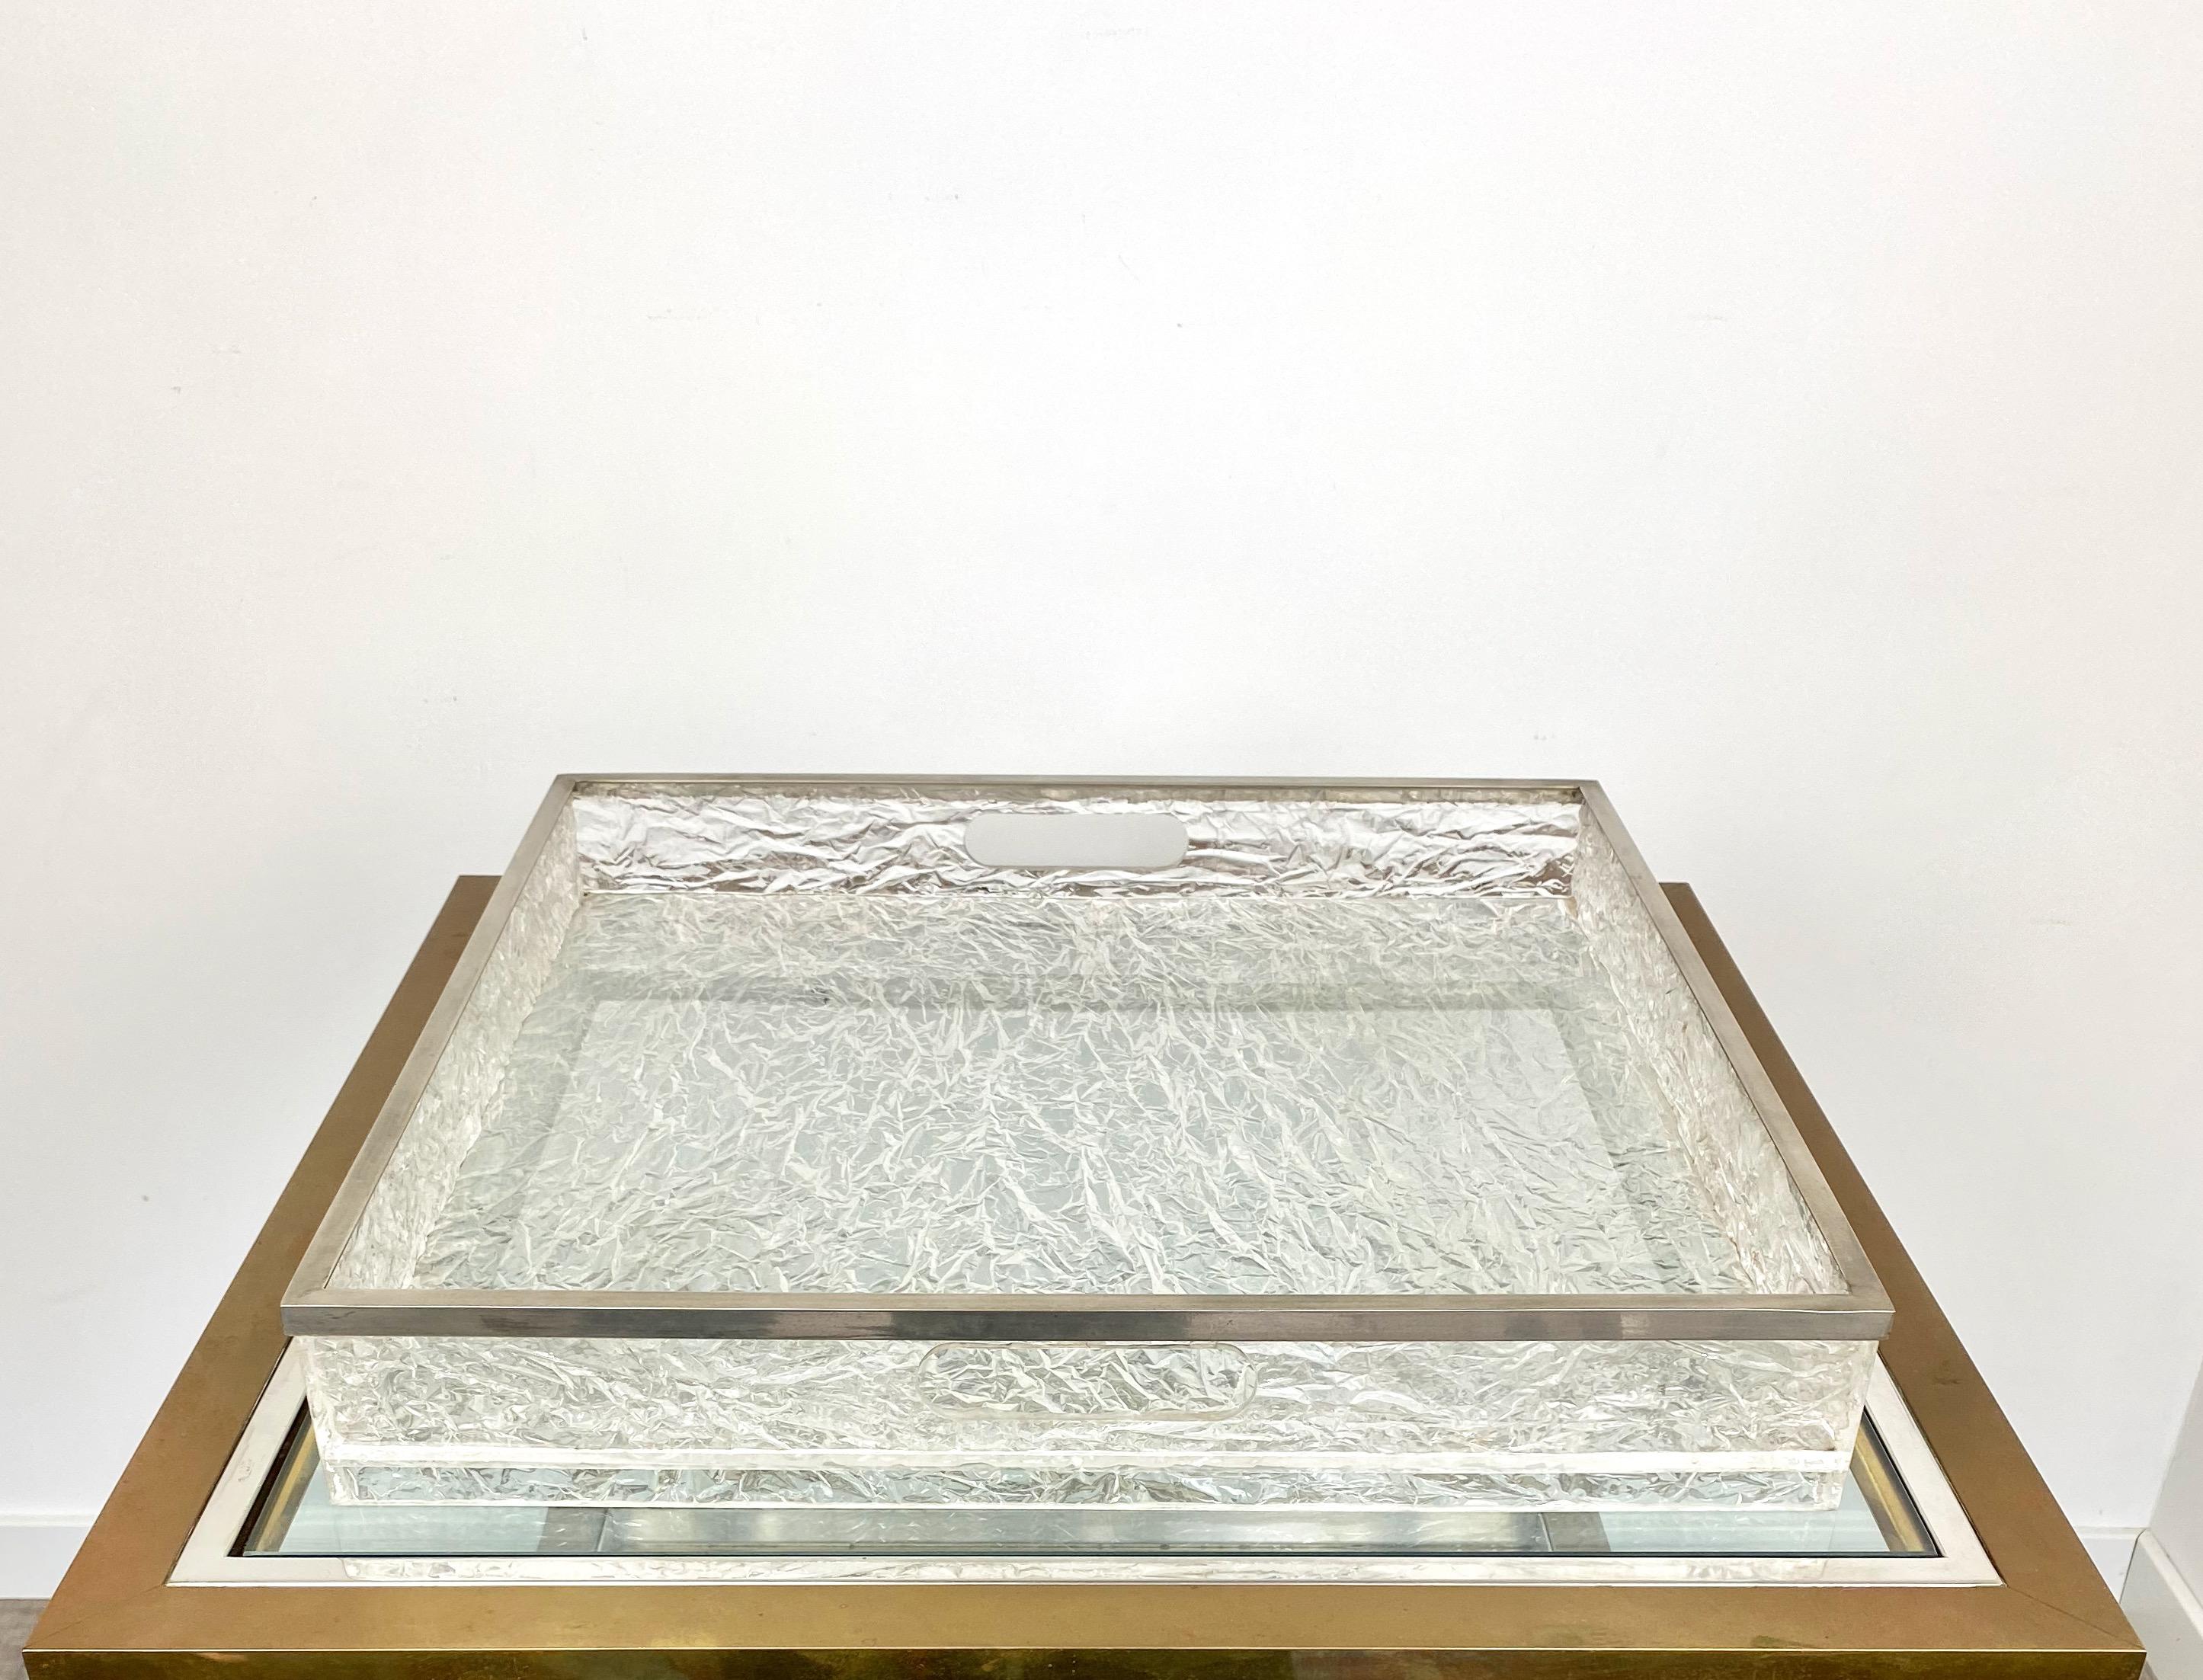 Centerpiece serving tray in ice effect Lucite and nickel frame attributed to the Italian designer Willy Rizzo, circa 1970.